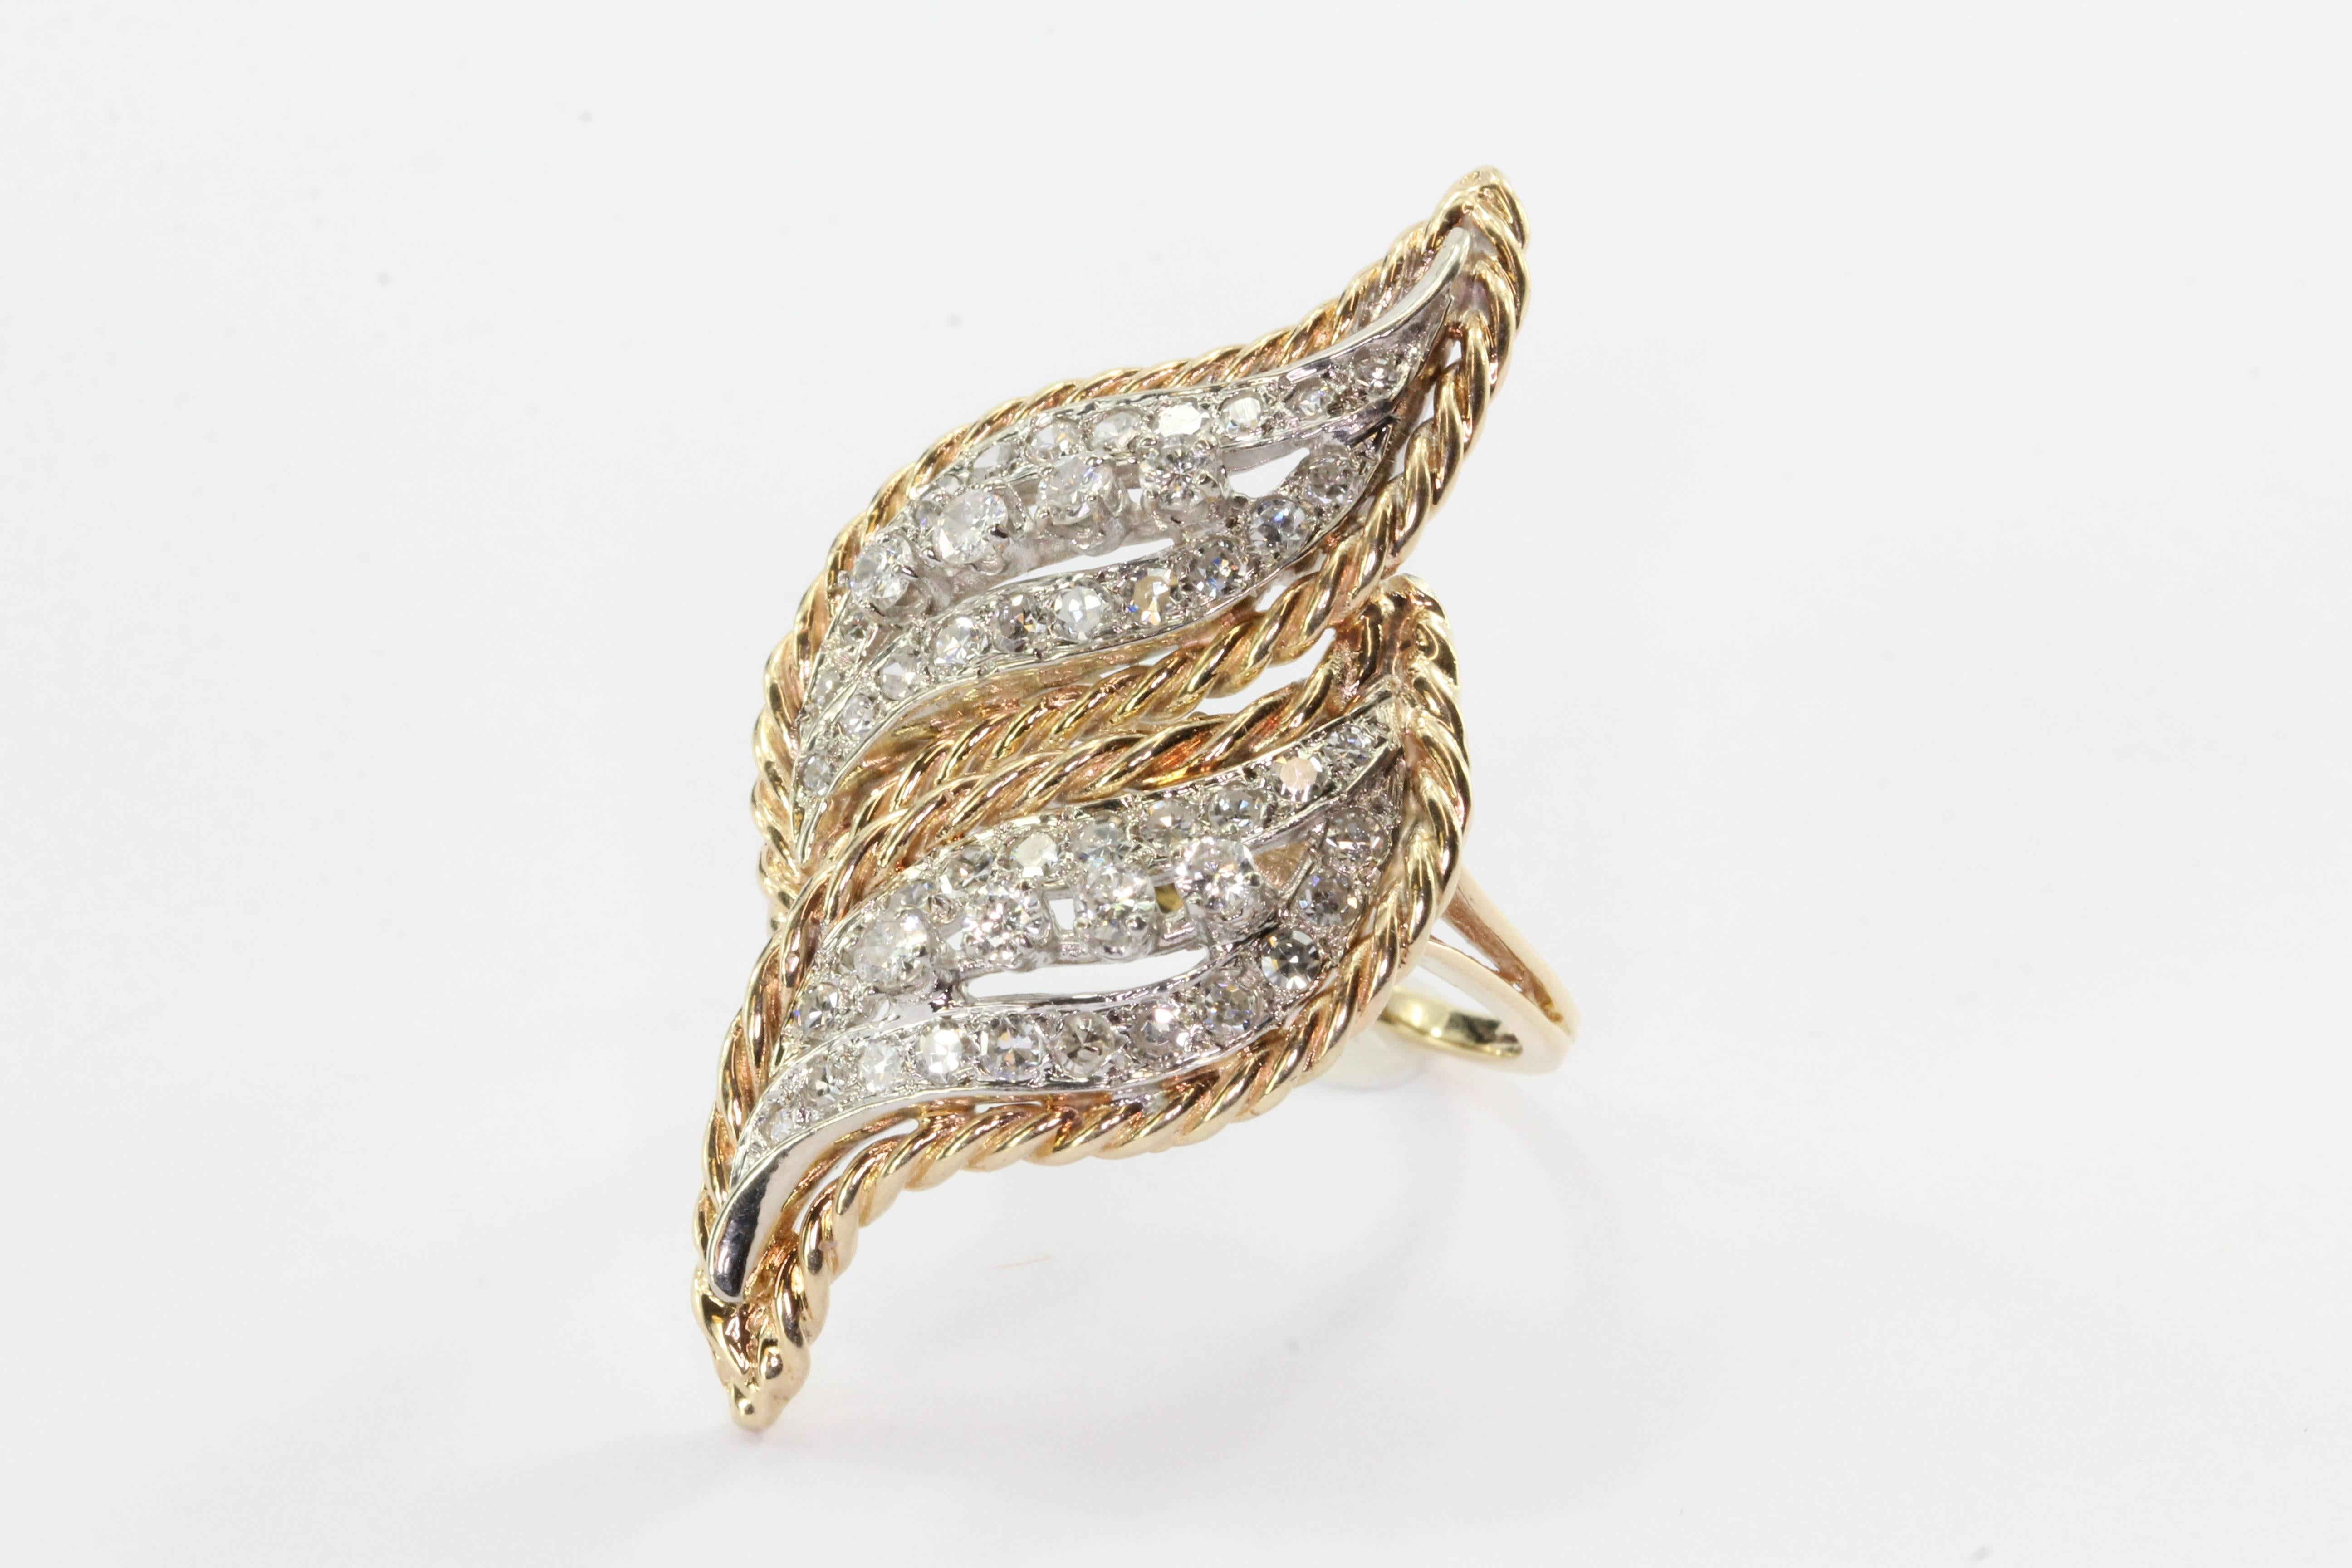 Vintage Retro 14K White & Yellow Gold Diamond Chunky Conversion Ring. The ring is in excellent estate condition and ready to wear. The ring was professionally converted from a necklace clasp into a ring. It is set with approximately 1.28 carats of